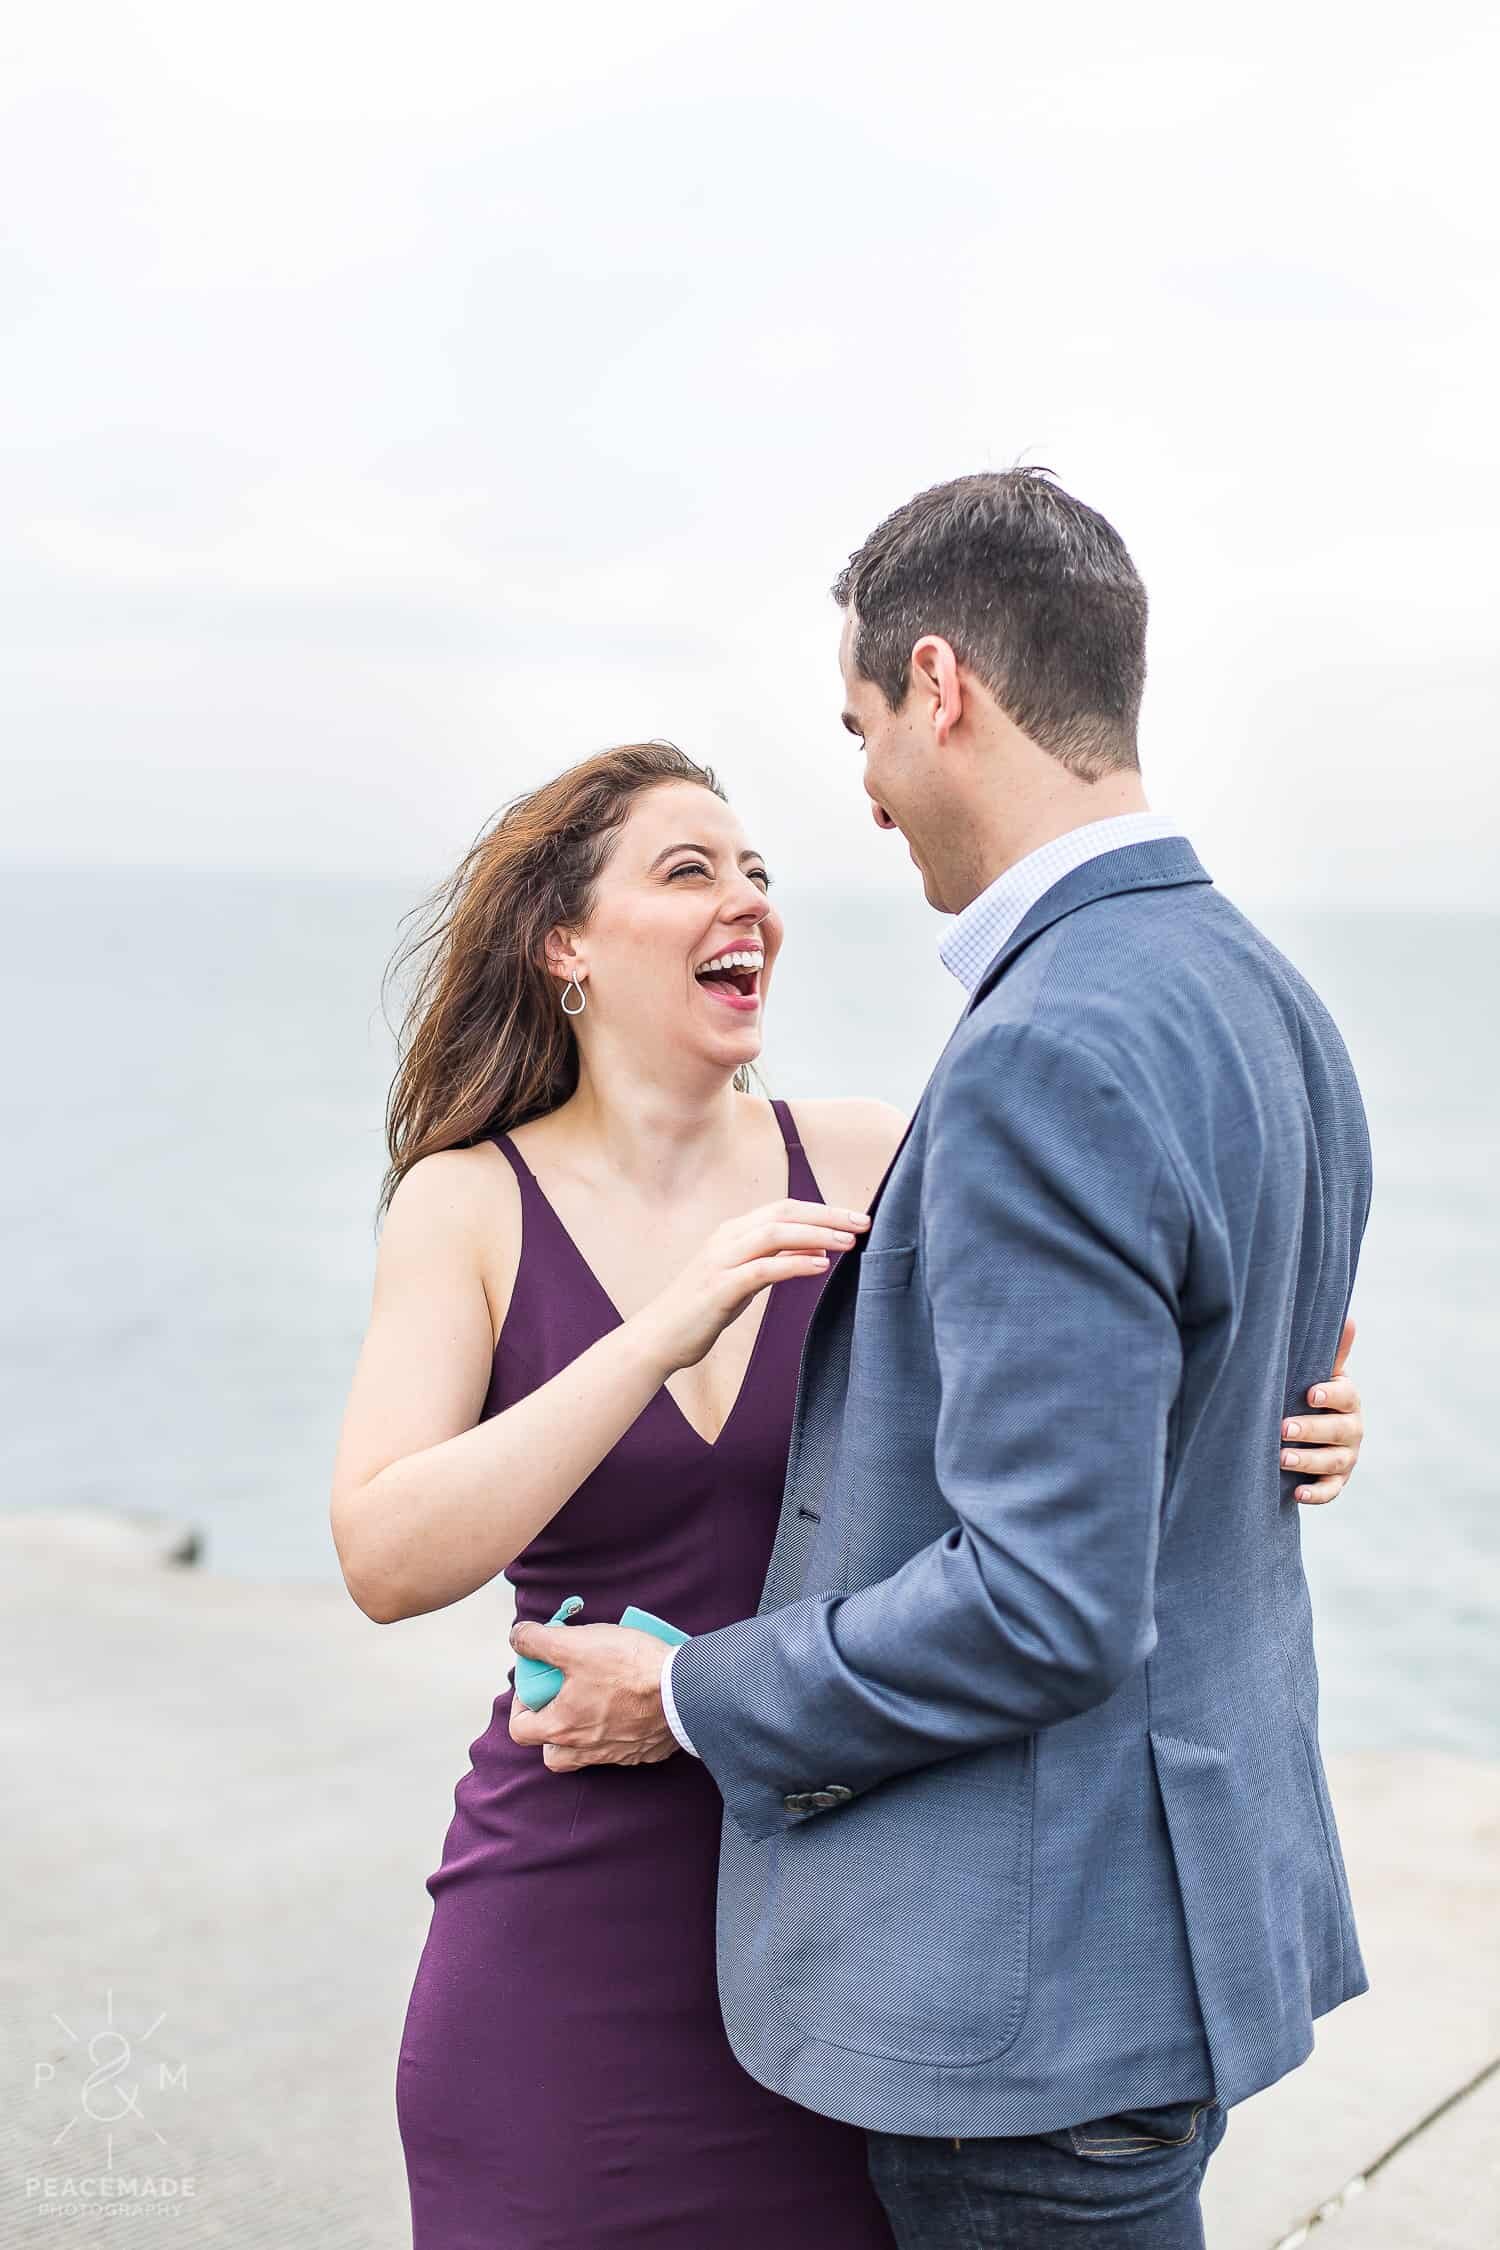 montrose-beach-proposal-engagement-session-peacemade-photography_2285.jpg